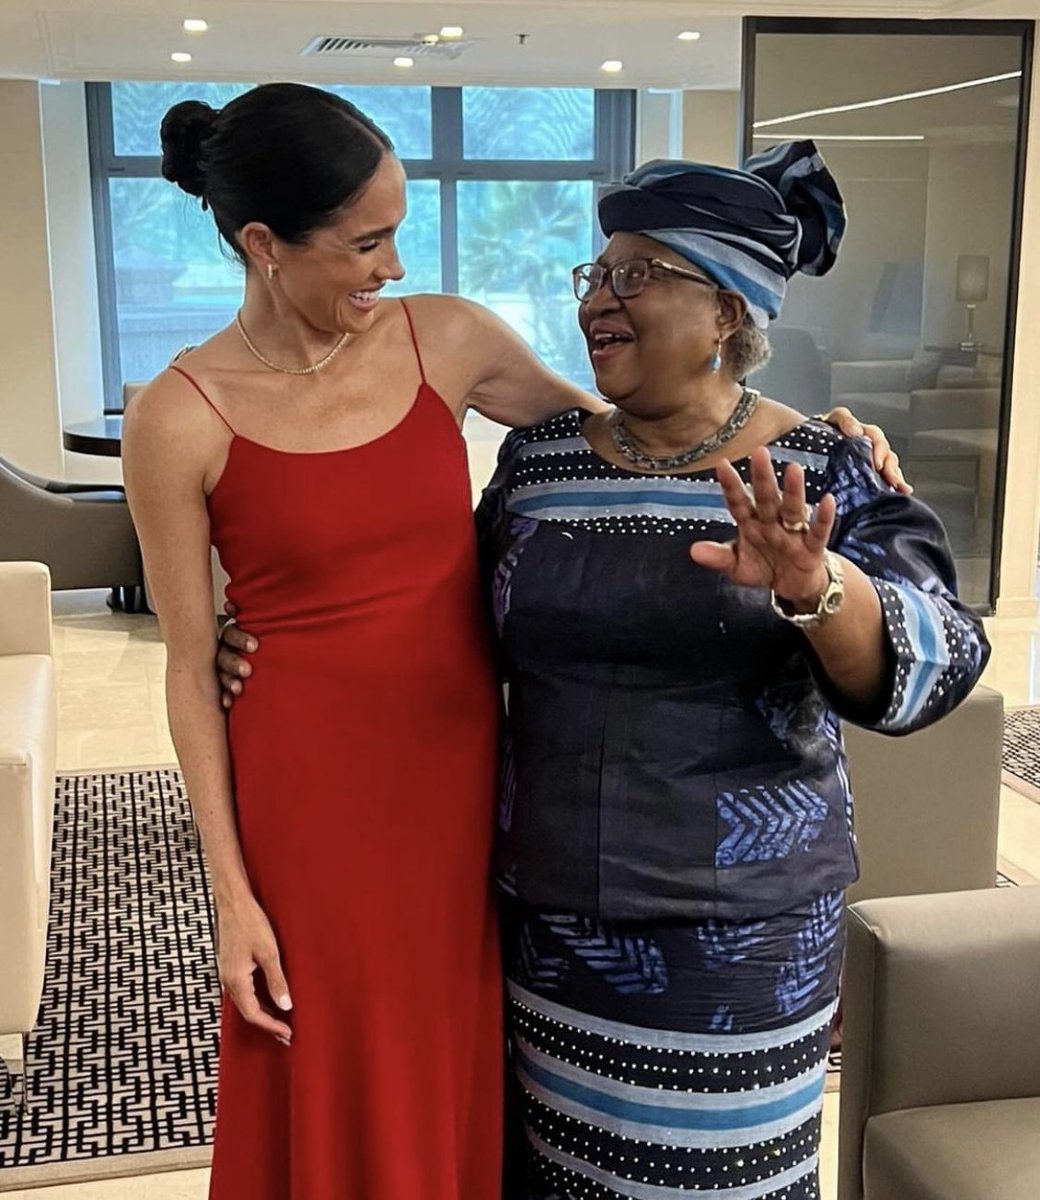 Dr. Okonjo-Iweala recognizes the pressure Meghan is under in the public eye, telling PEOPLE: “She’s a role model for young women. She’s a woman who is not in an easy position, and people are looking to see how is she managing and navigating this. She brings: inspiration.”🥺